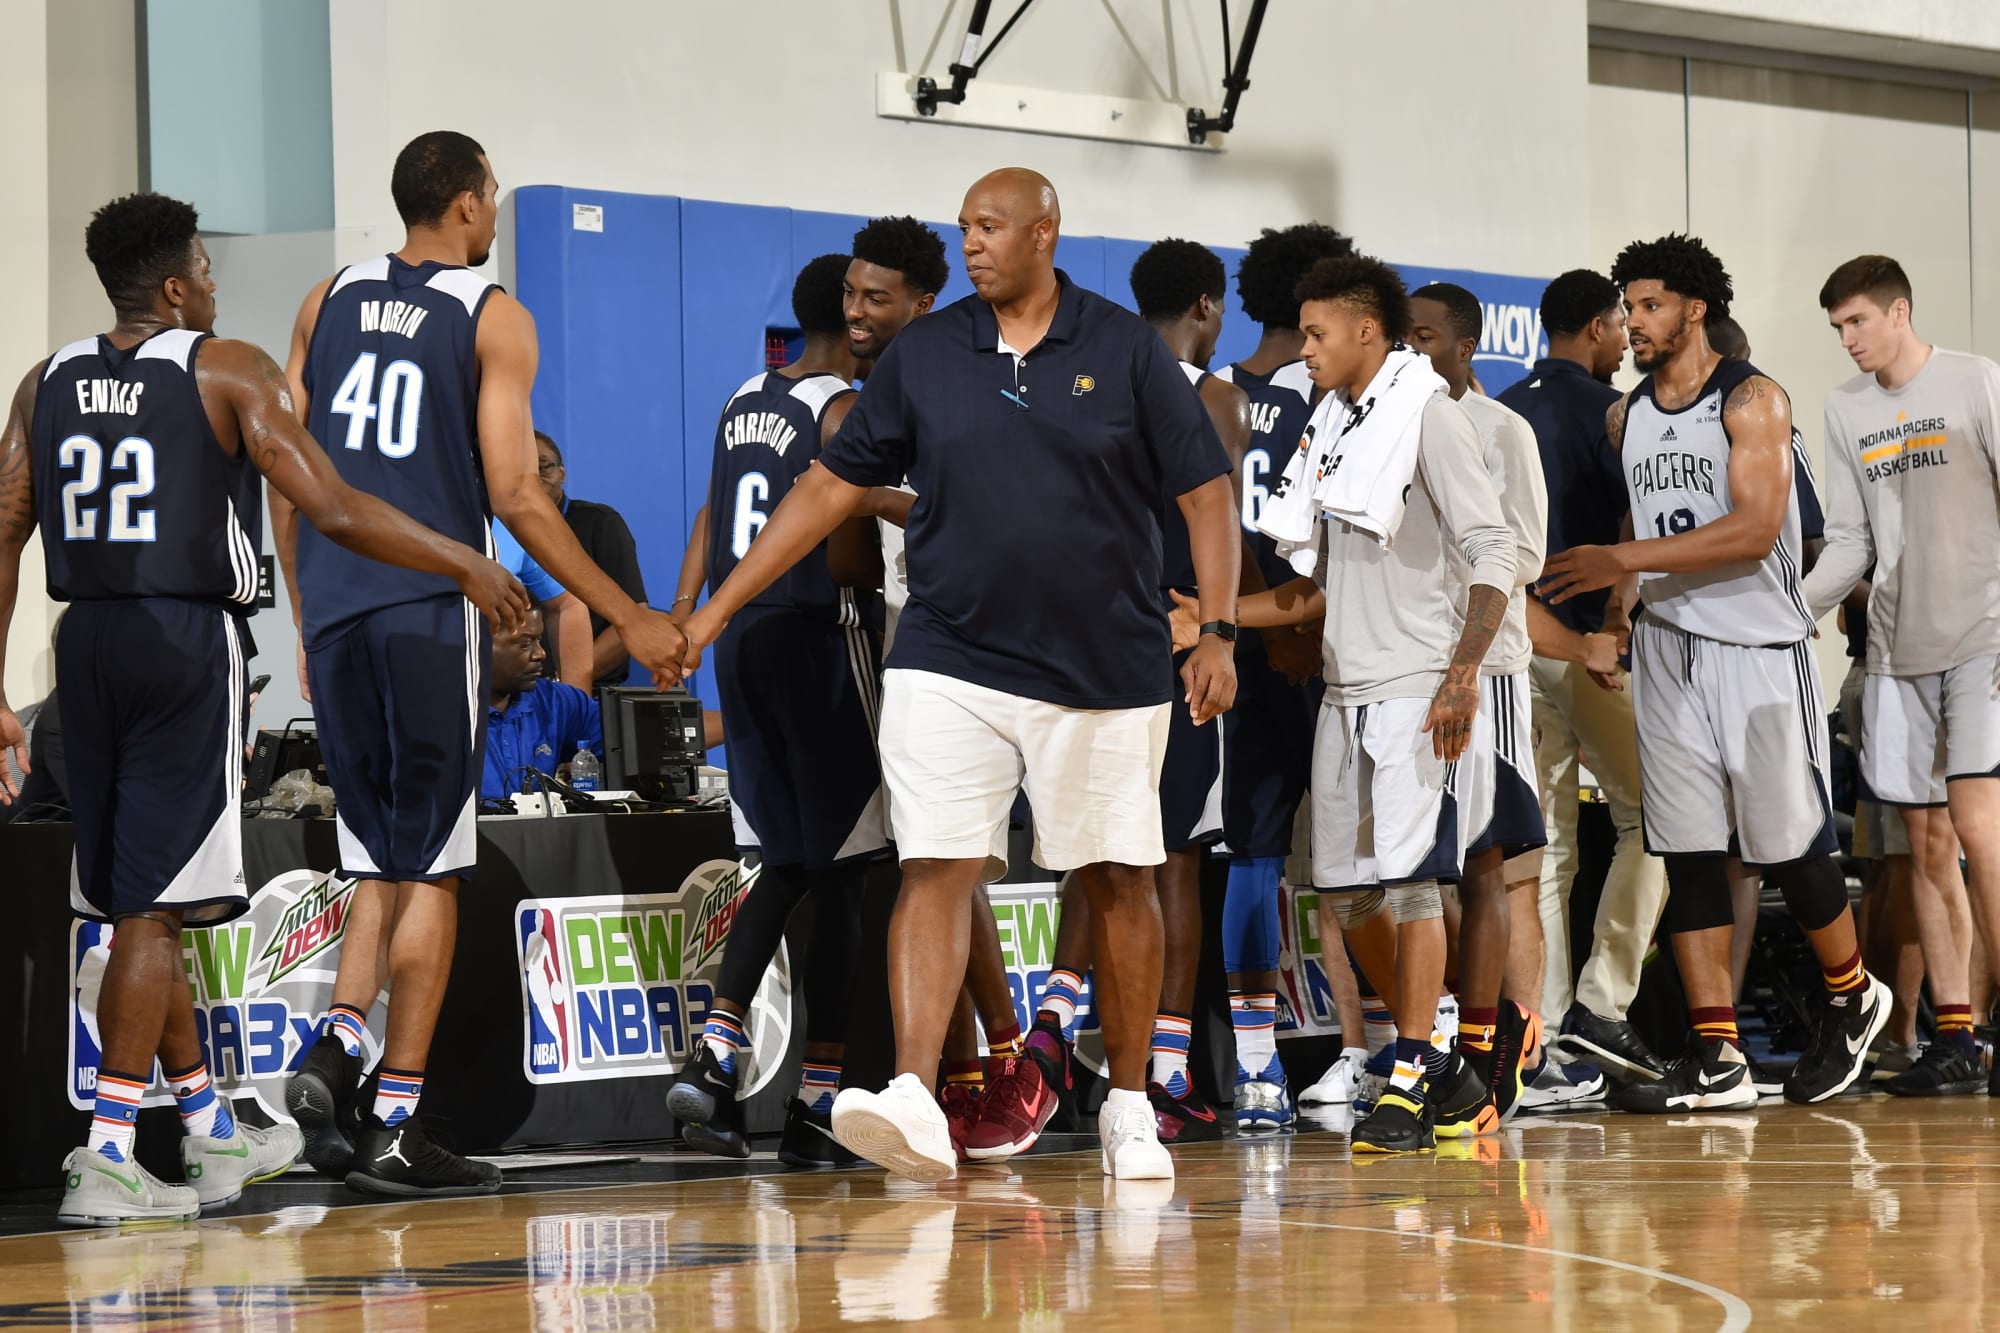 How to watch the Indiana Pacers at the Las Vegas Summer League